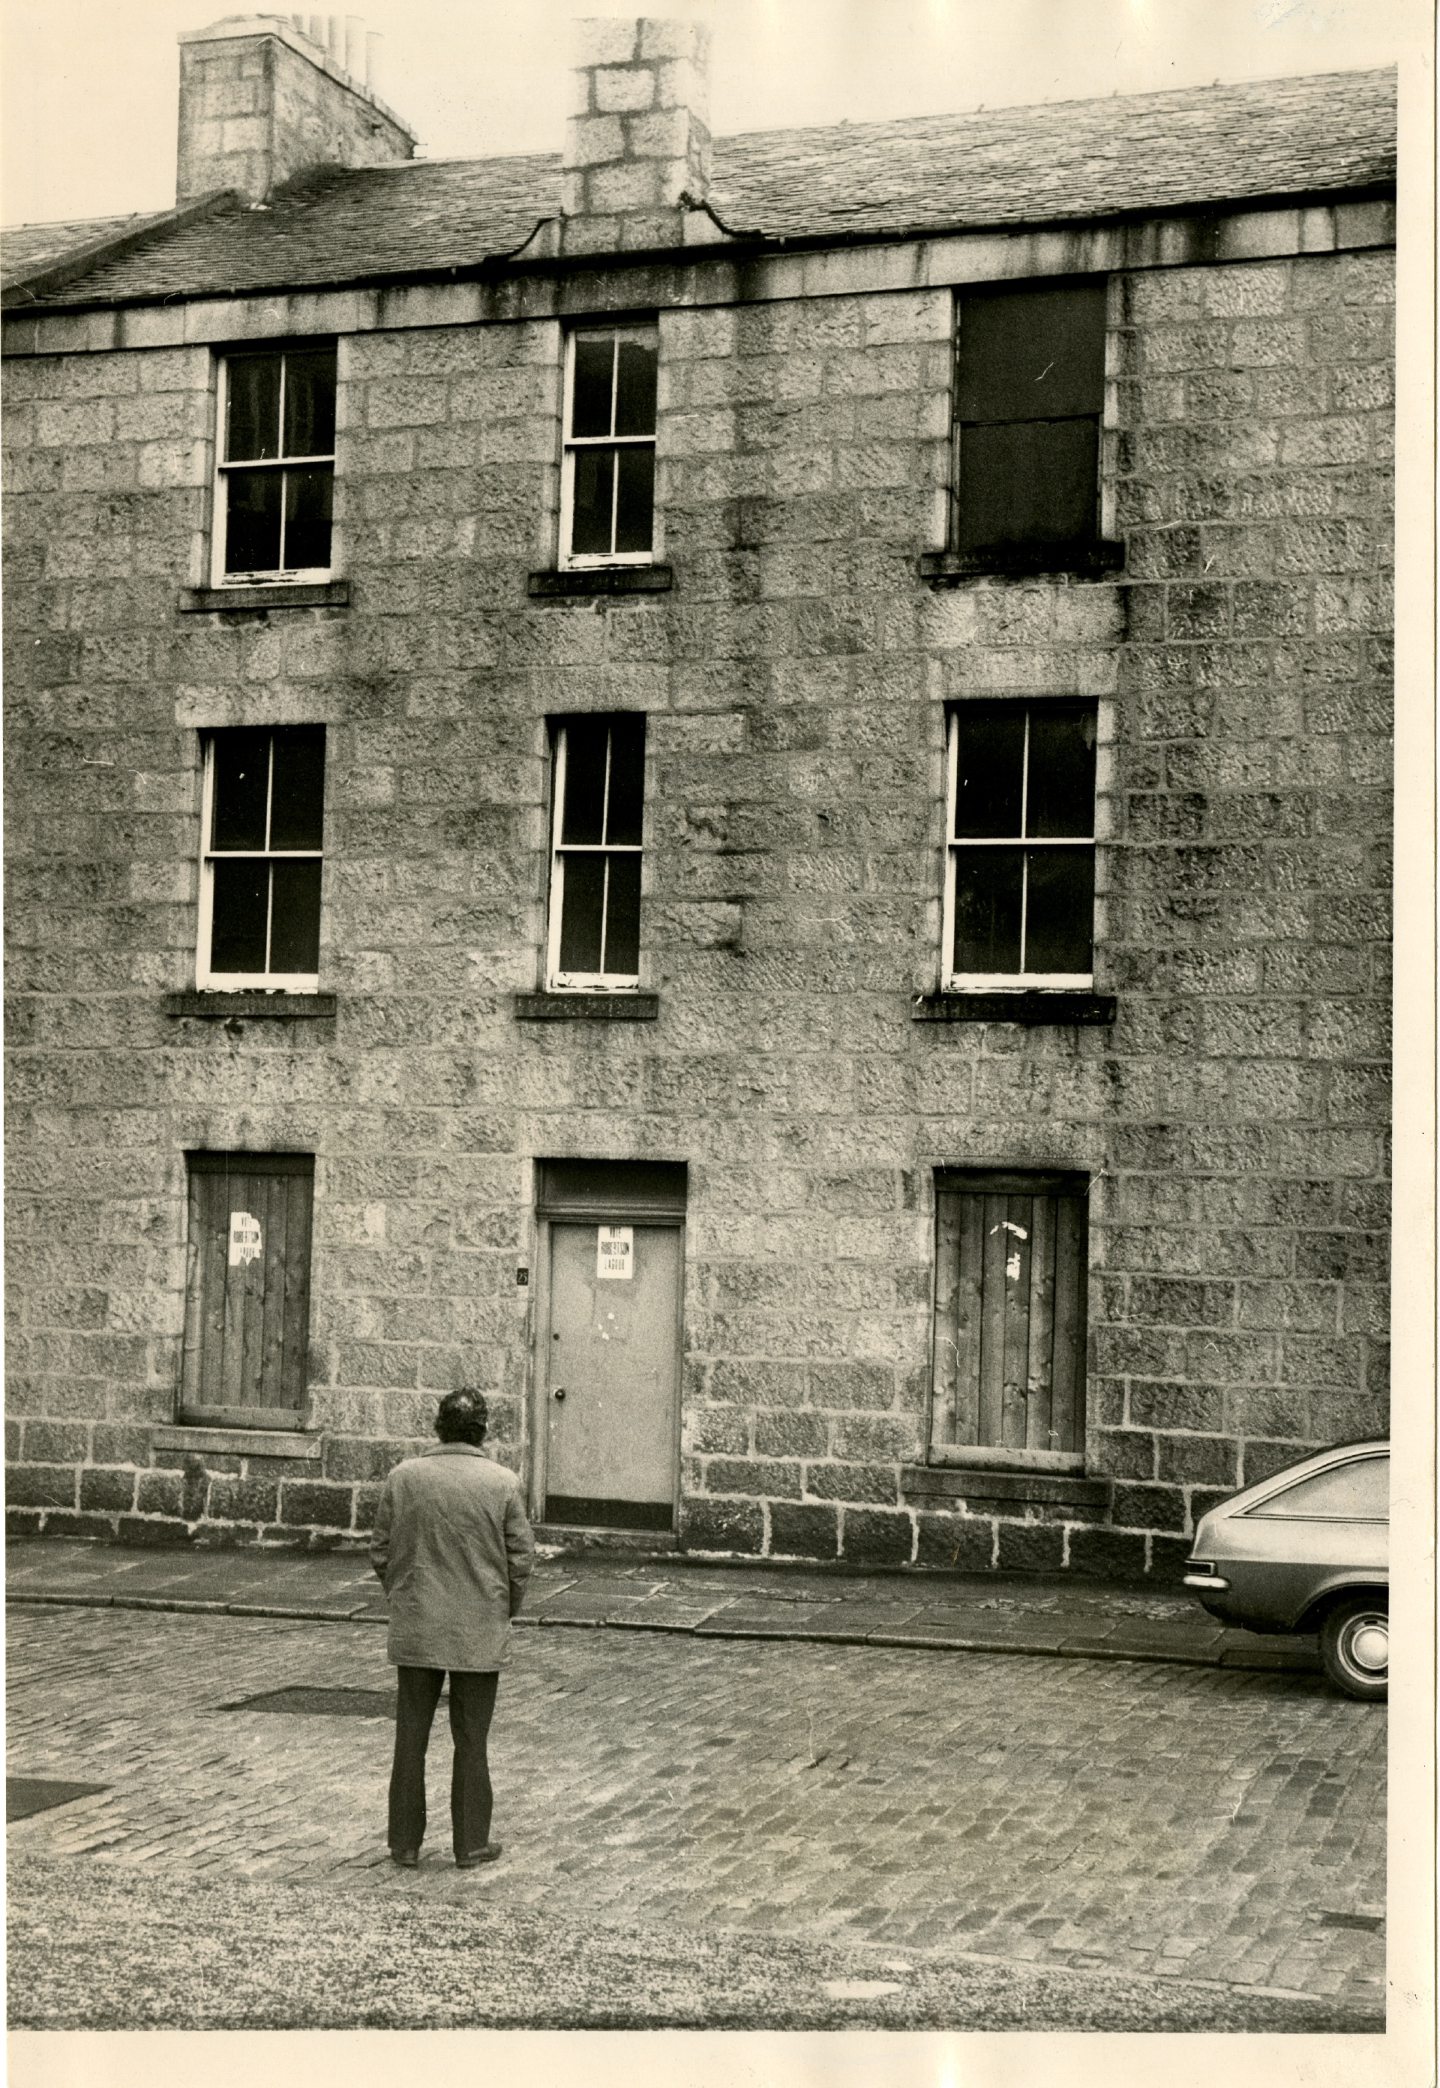 This tenement in Baker Street in Aberdeen lay empty for many years after it was boarded up in the late 1960s.